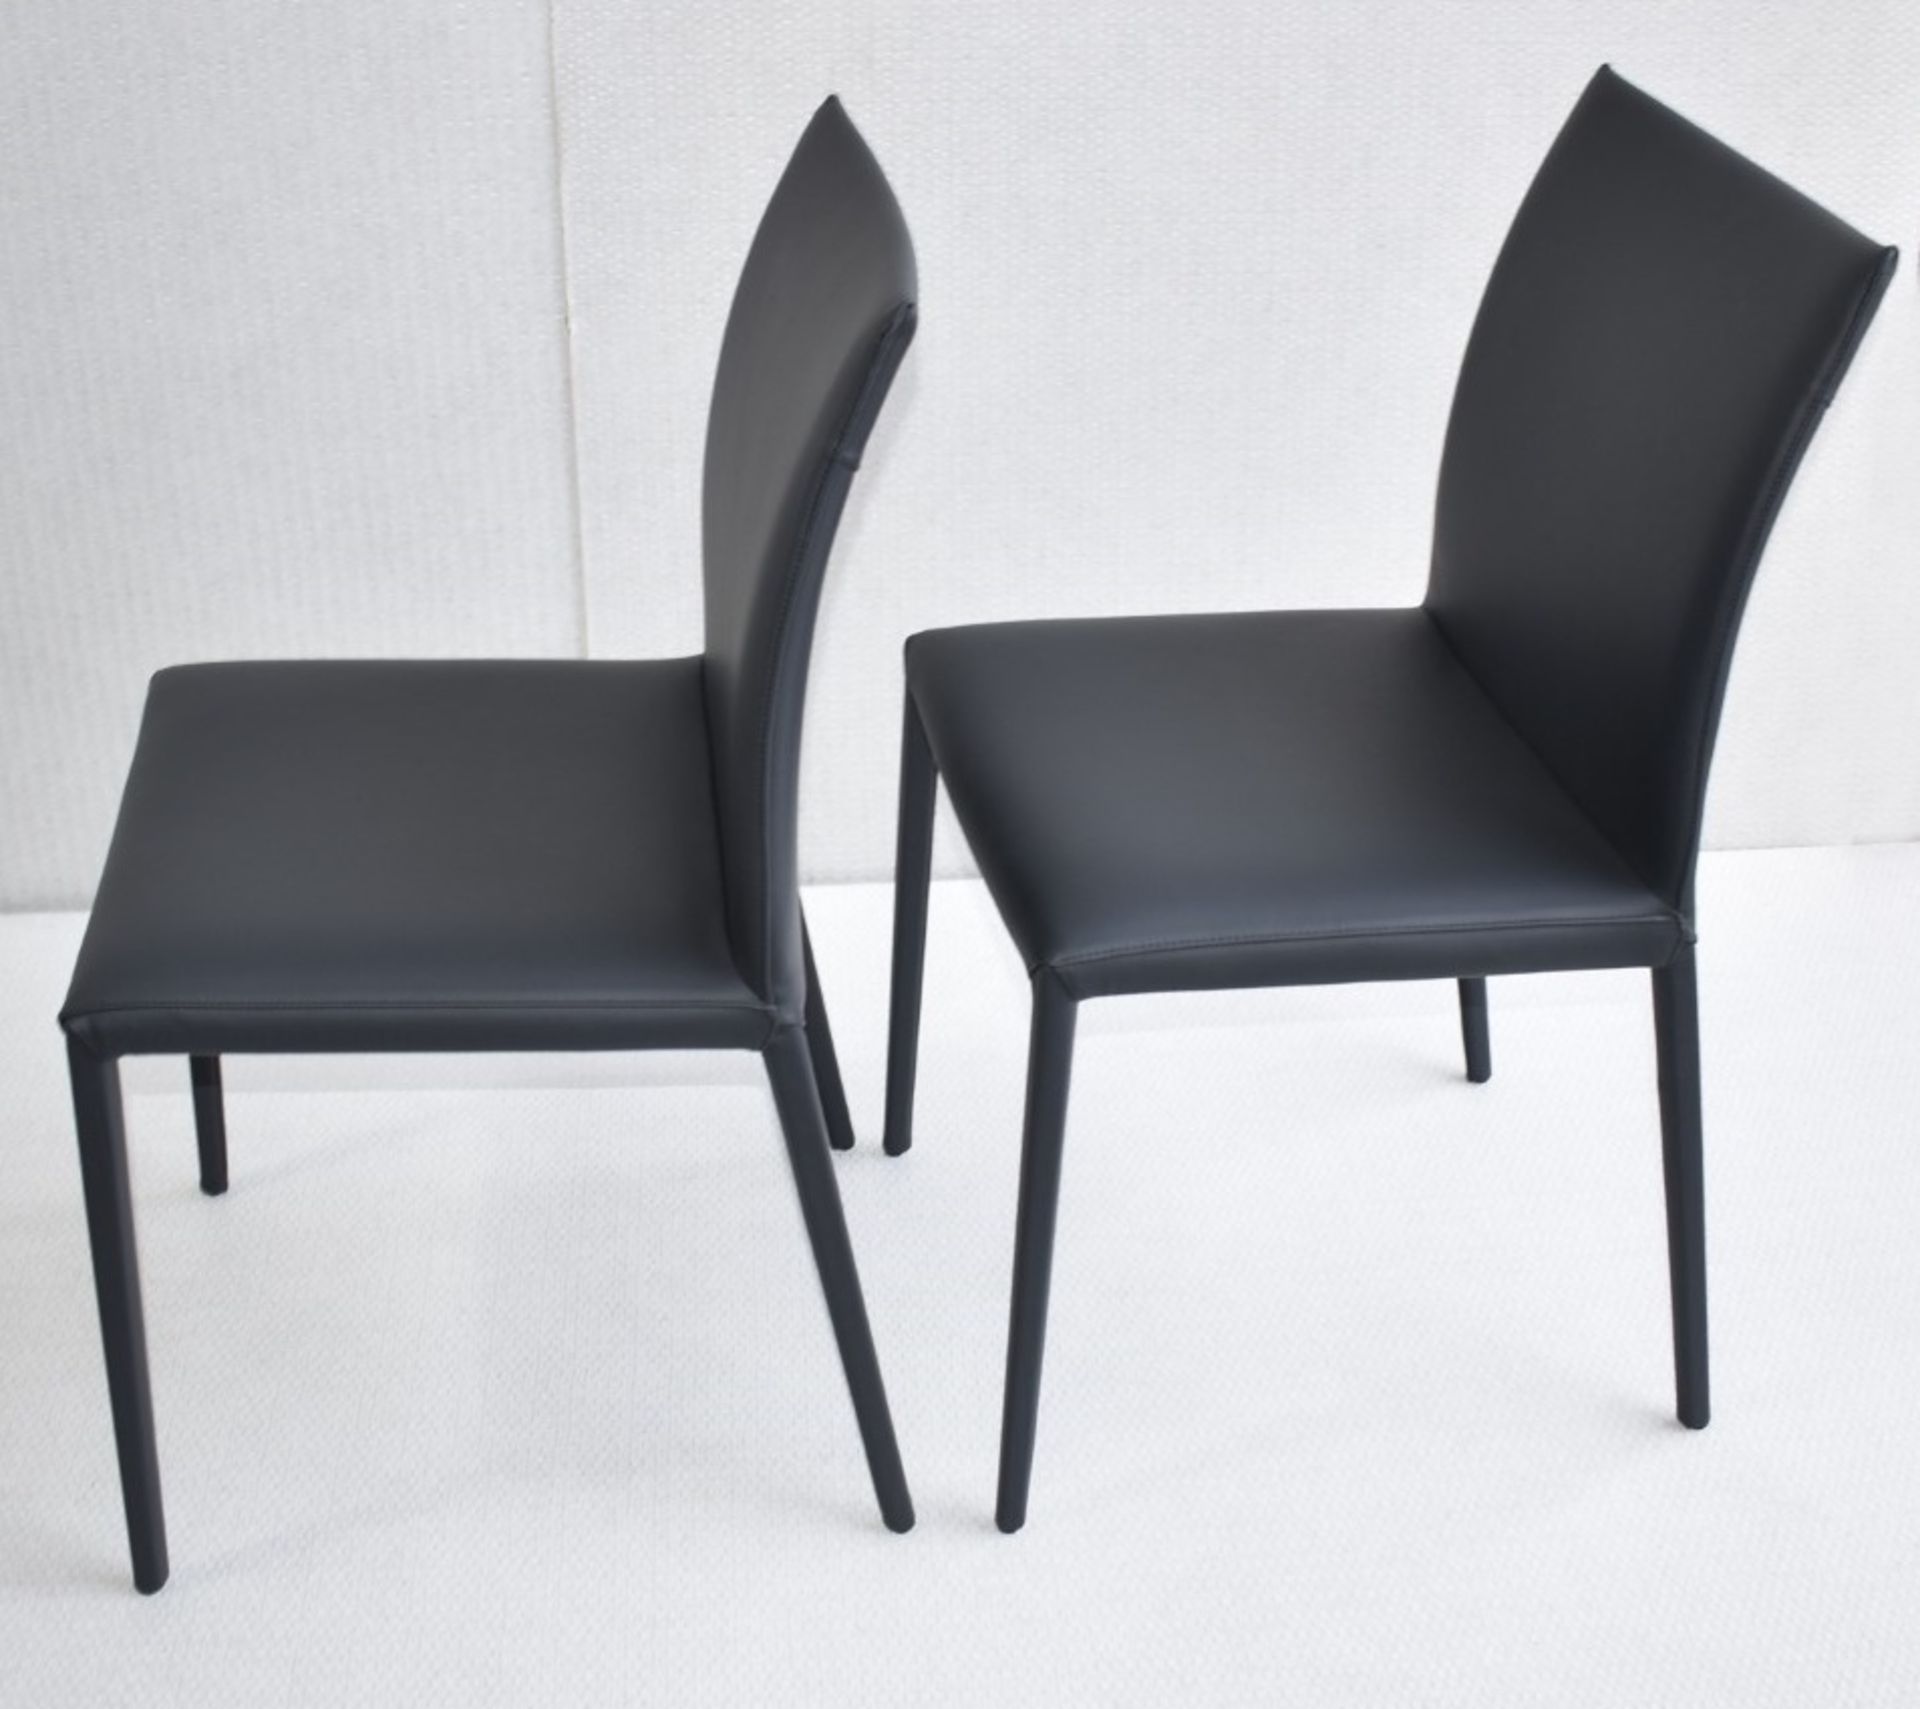 Pair of CATTELAN ITALIA Norma Designer Leather Upholstered Dining Chairs - Original Price £1,258 - Image 2 of 5